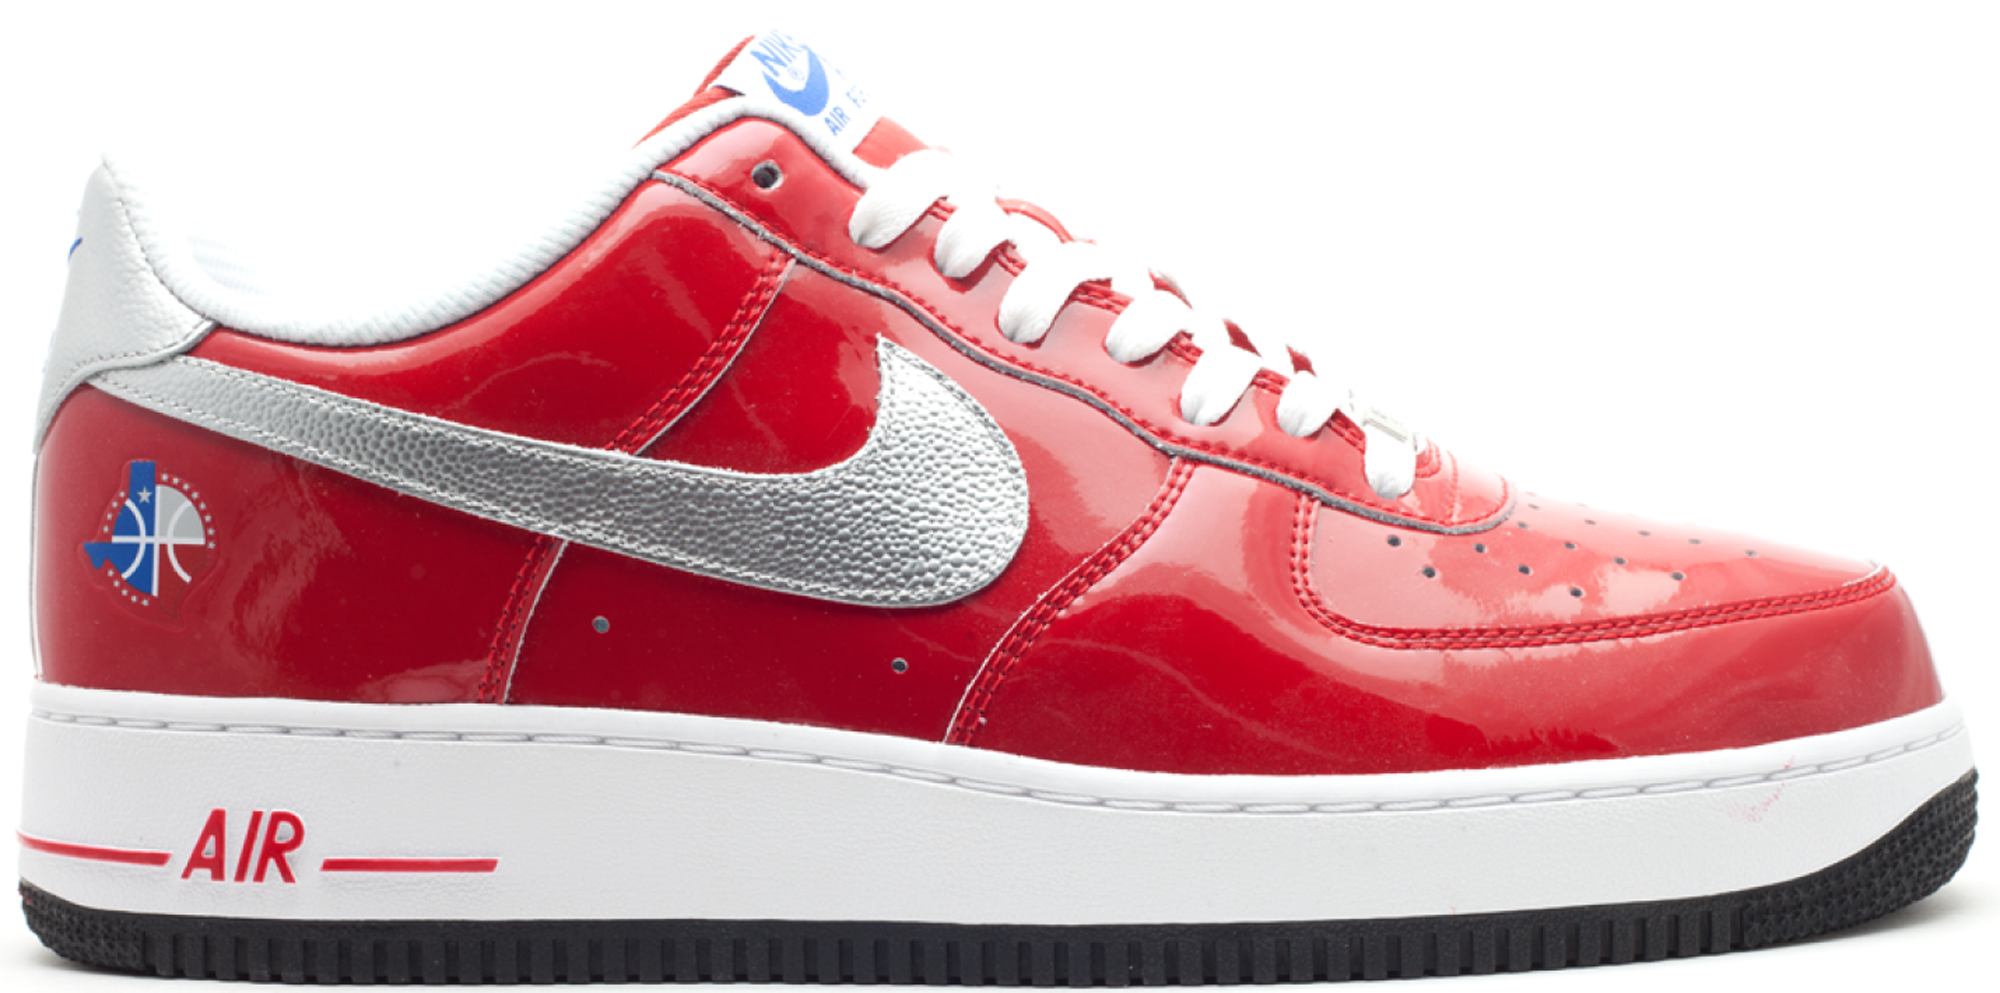 Nike Air Force 1 Low All-Star 2010 Red 